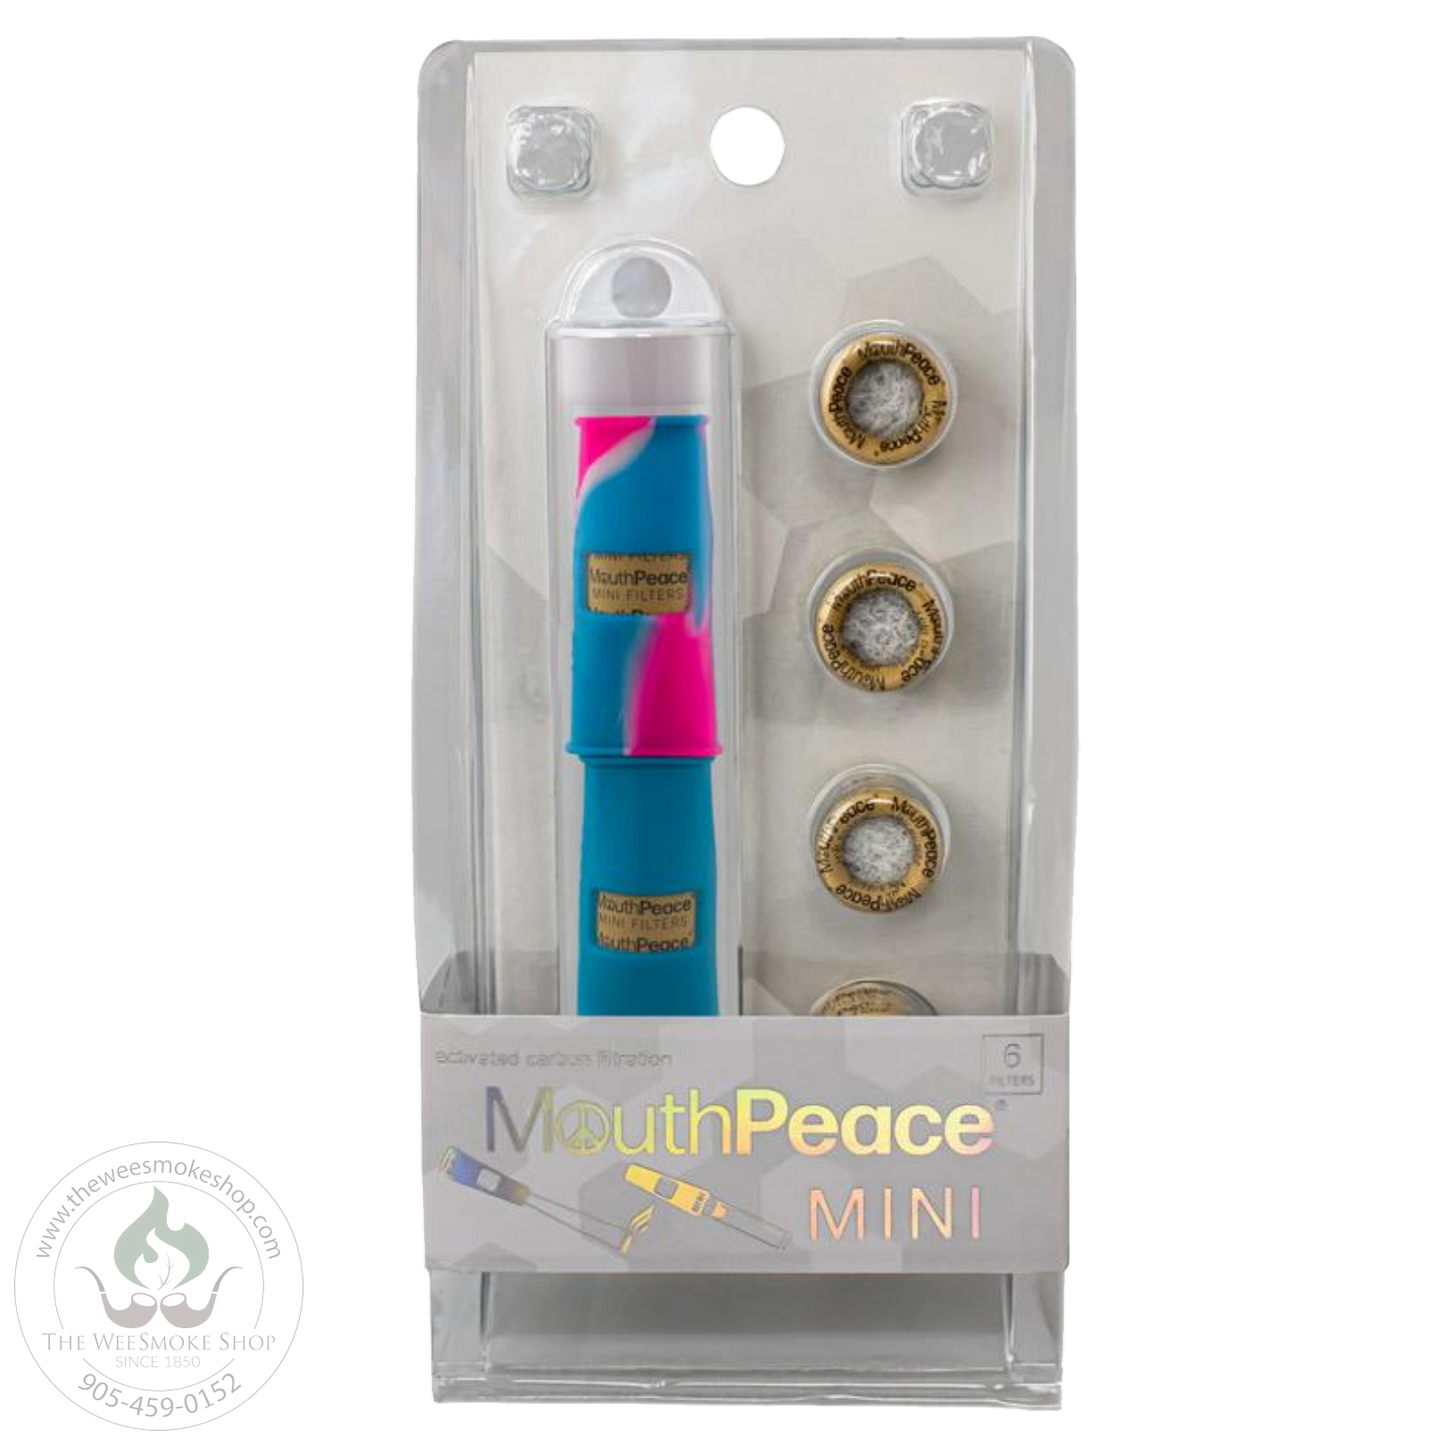 Moose Labs MouthPeace Mini in the color blue and pink